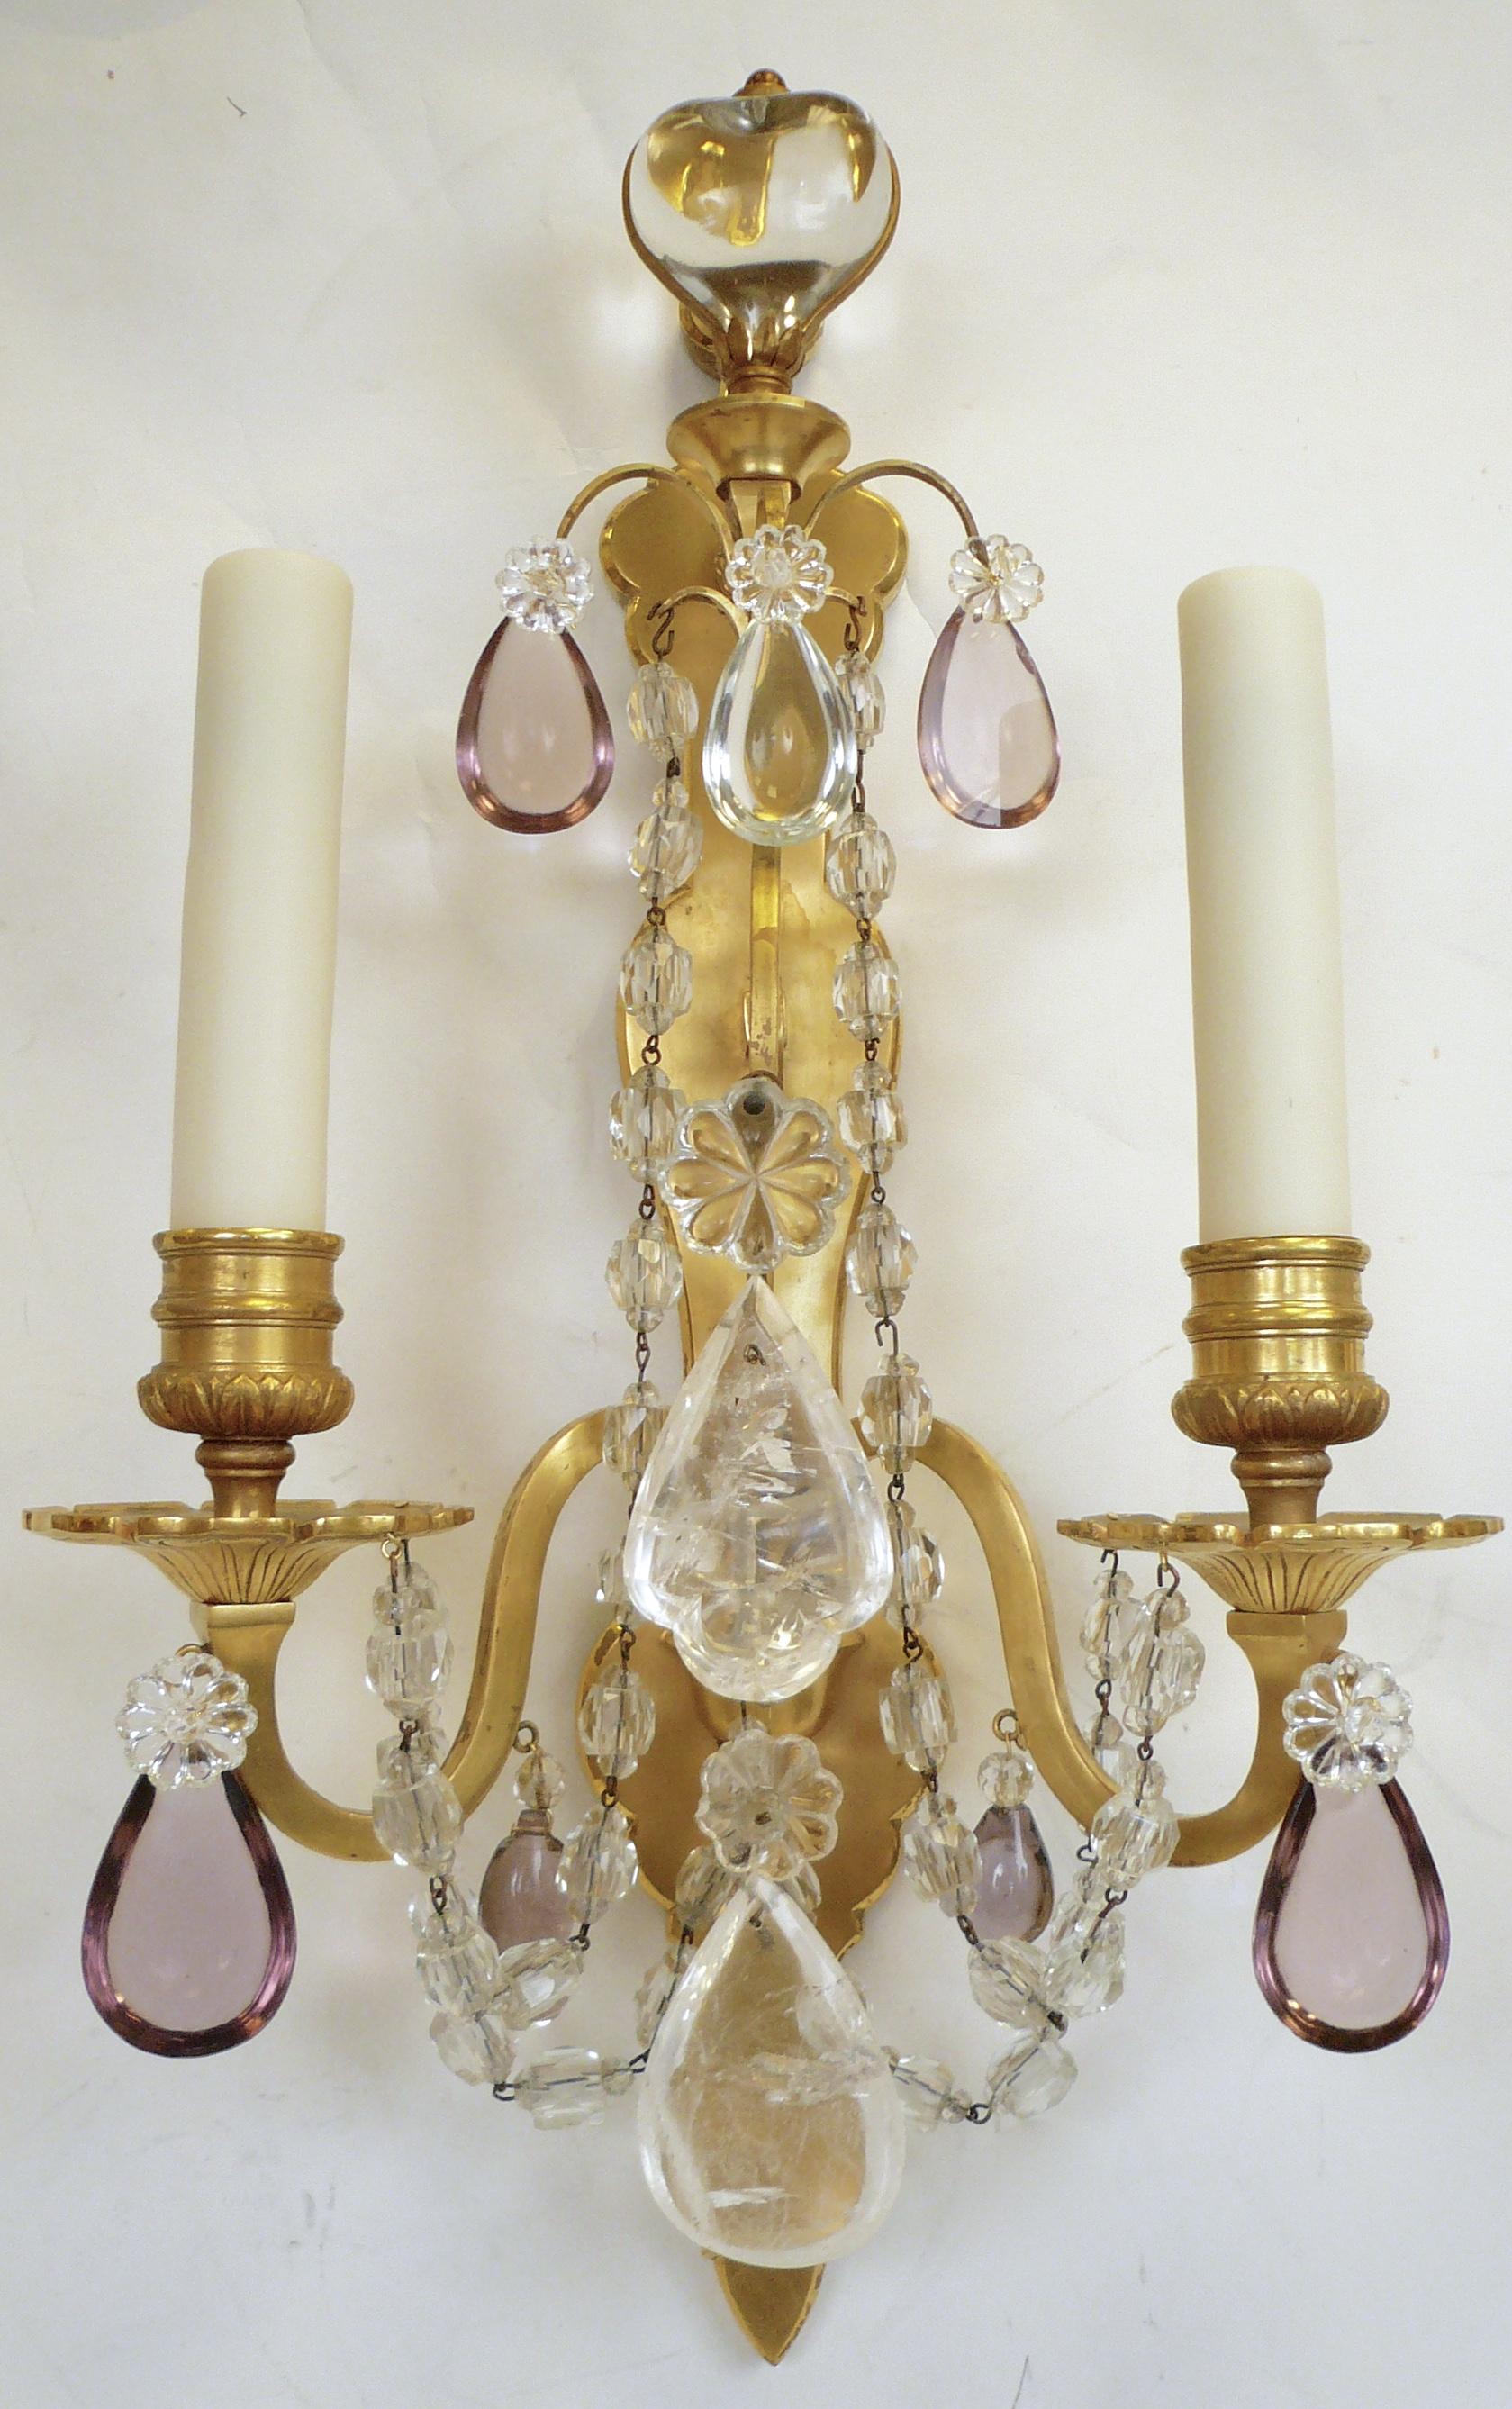 This beautiful pair of Louis XVI style twin arm sconces feature neoclassical motifs including acanthus leaves. They are trimmed in clear and amethyst cut crystal prisms, and rock crystal pendants.